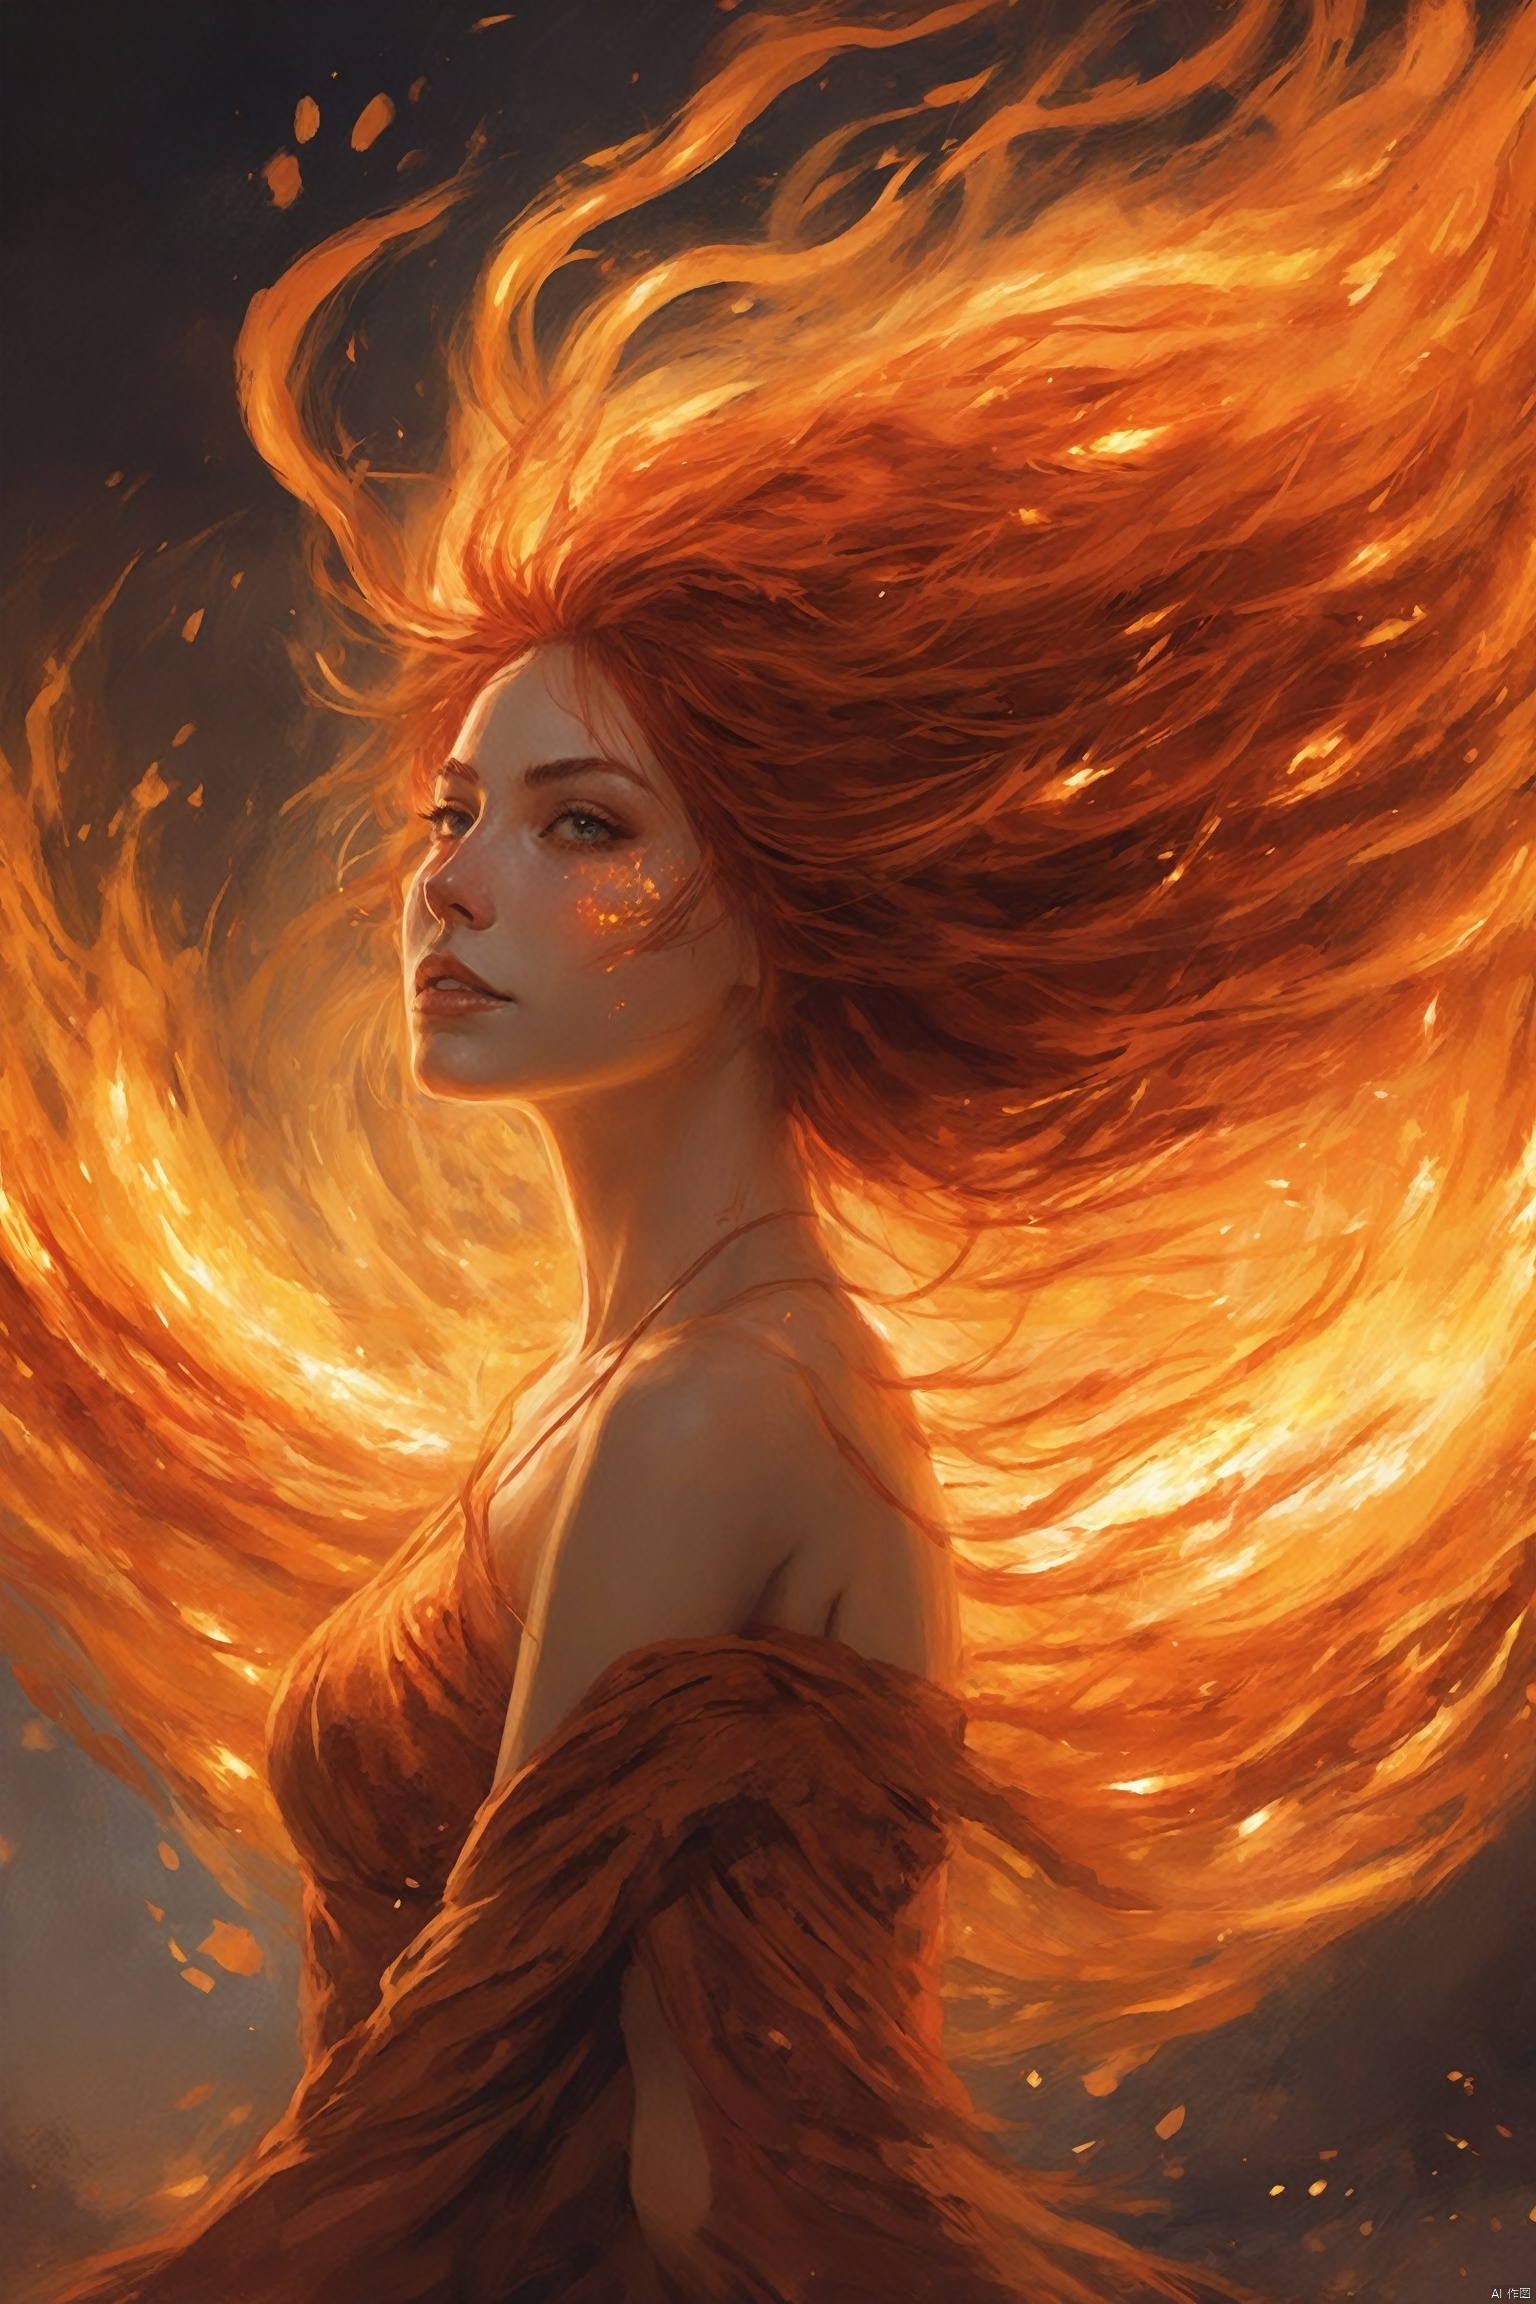  A fire spirit, her body a living flame, dances among the embers of a dying bonfire. Her hair is a cascade of fiery reds and oranges, and her eyes glow with the intensity of a thousand suns. The light from her very being illuminates the night, casting a warm, flickering glow on the surrounding landscape.